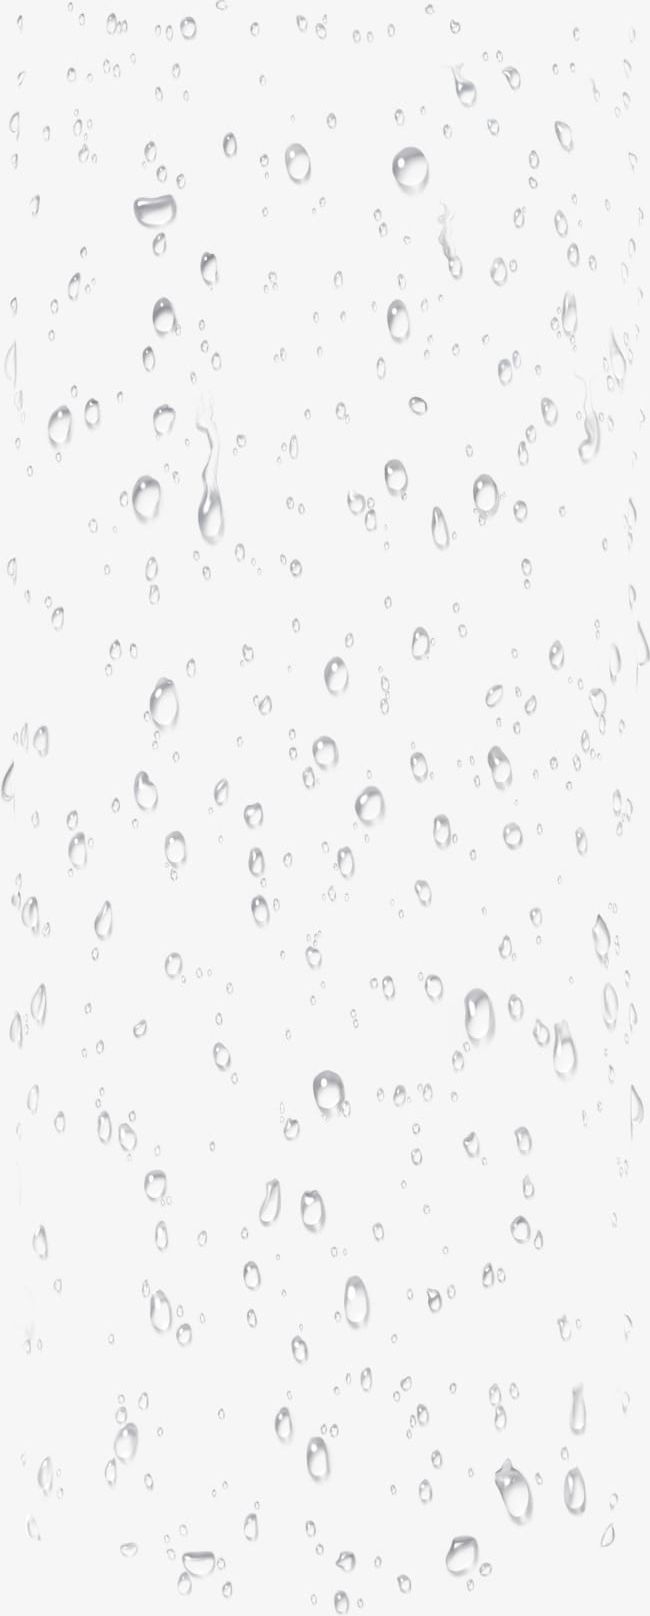 White Fresh Water Drop Border Texture PNG, Clipart, Border, Border Clipart, Border Texture, Drop Clipart, Droplets Free PNG Download